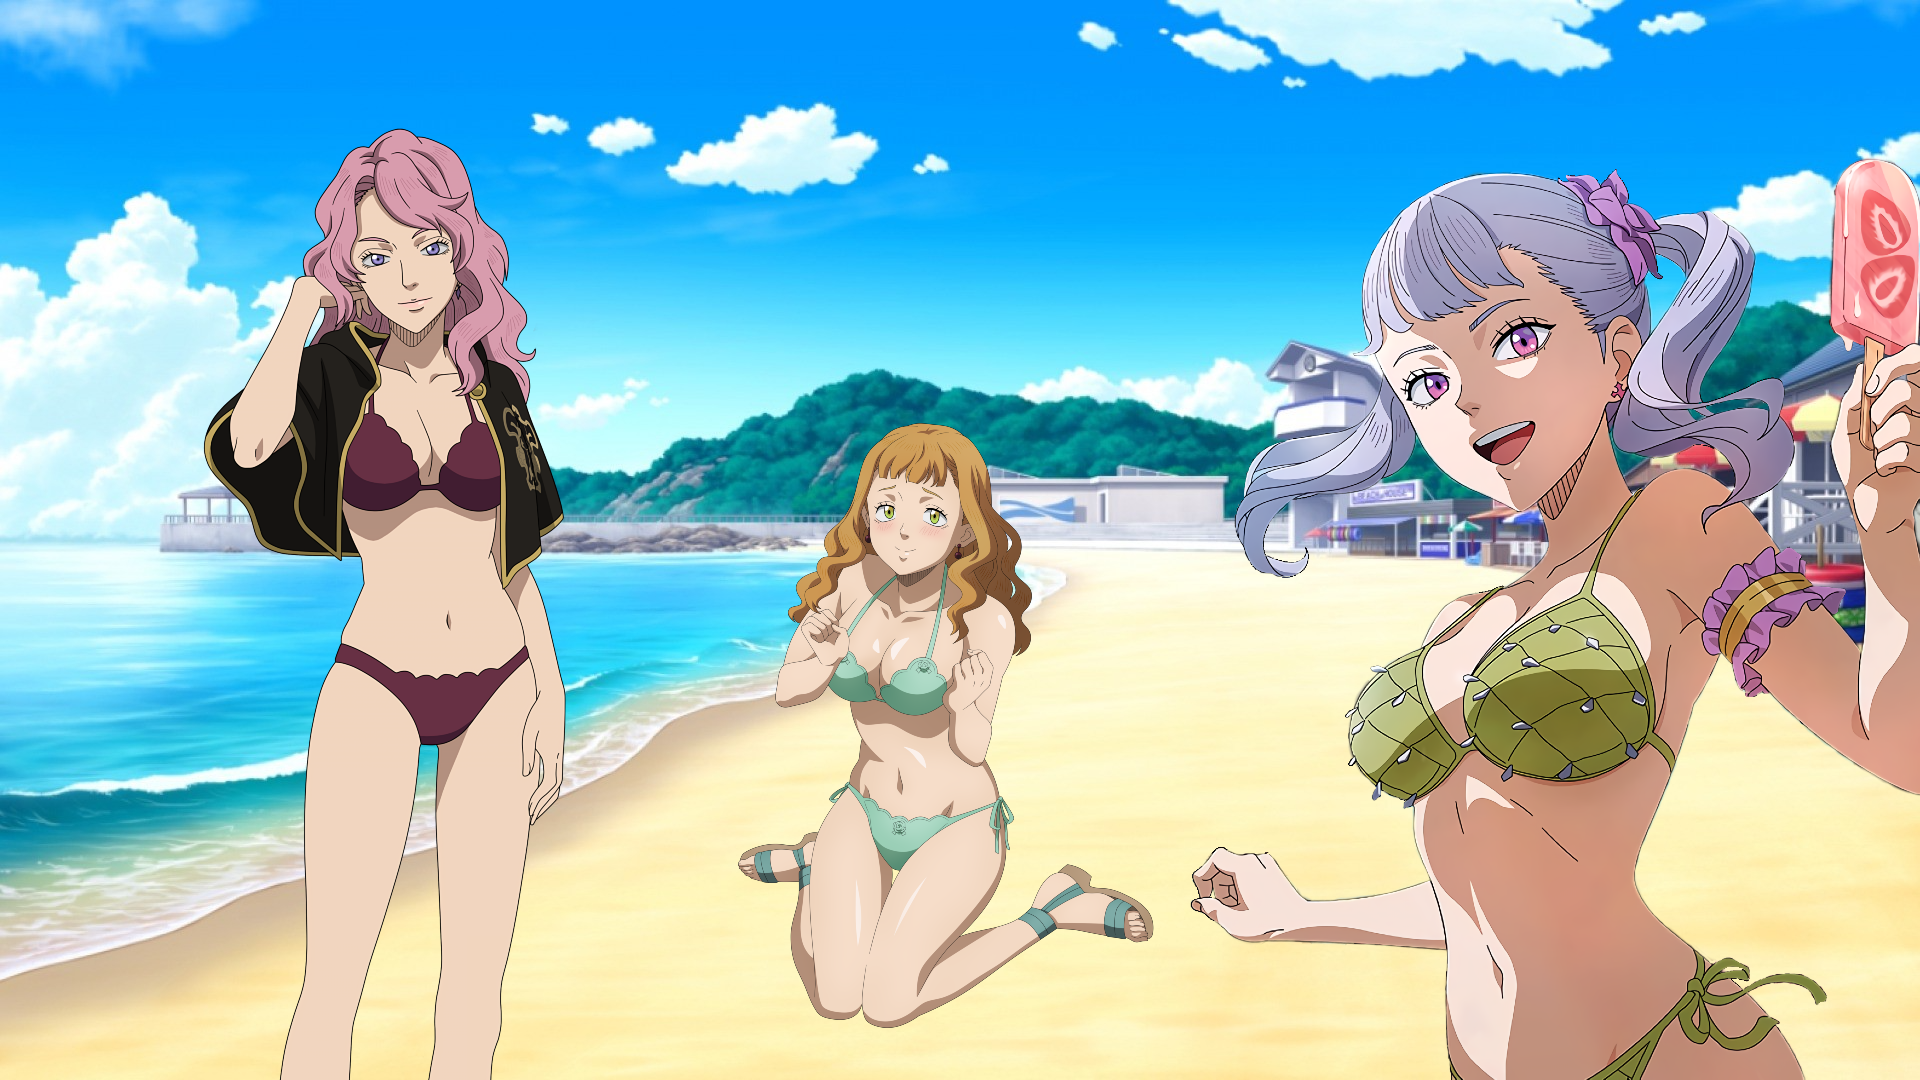 Get a taste of black clover noelle’s rule 34 artistry with these sexy pictures